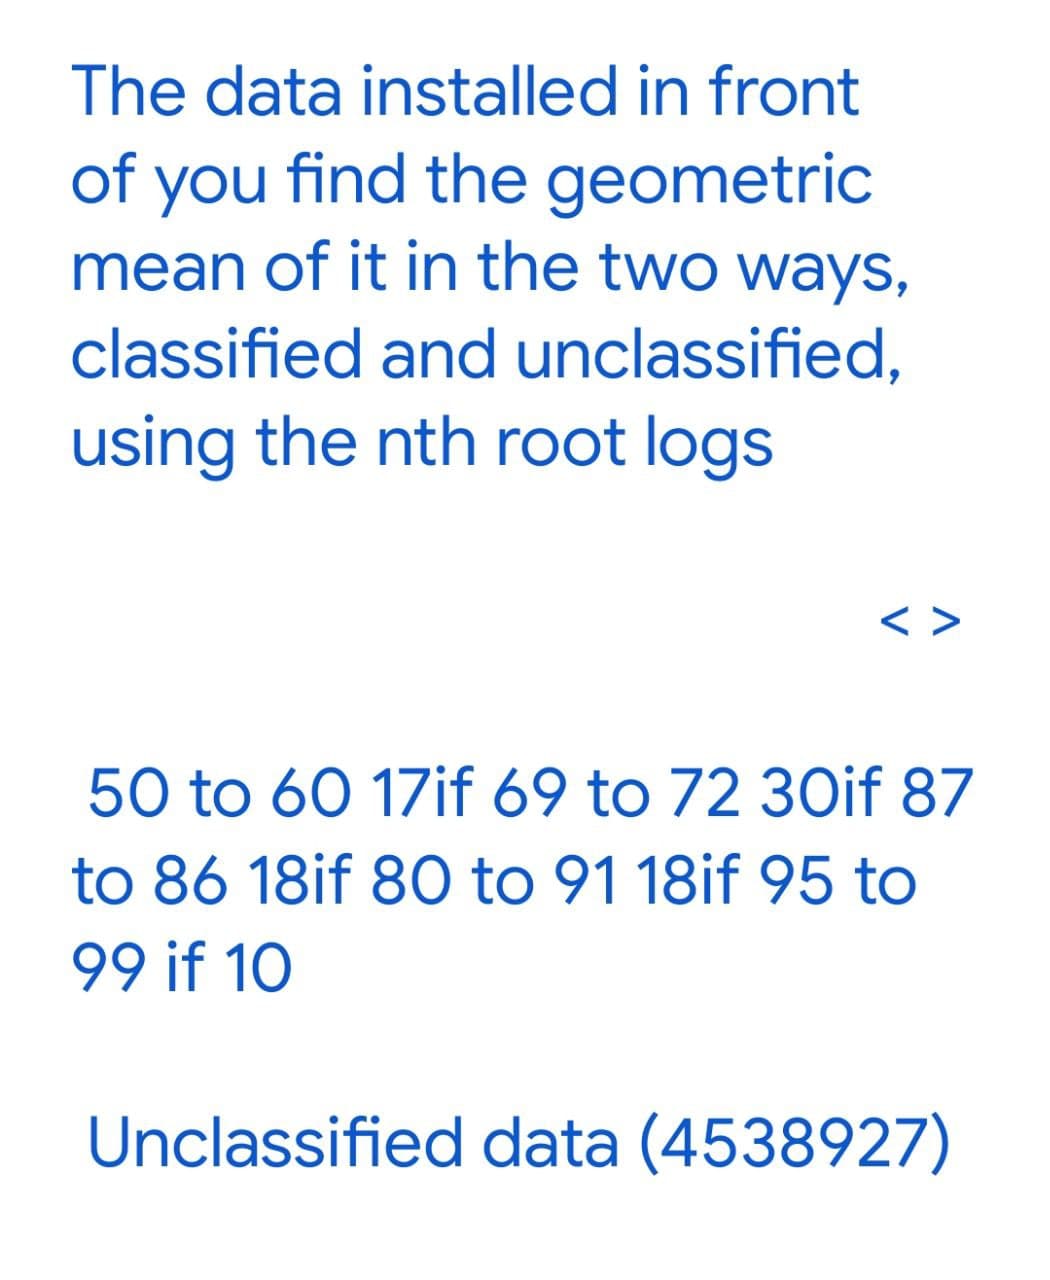 The data installed in front
of you find the geometric
mean of it in the two ways,
classified and unclassified,
using the nth root logs
< >
50 to 60 17if 69 to 72 30if 87
to 86 18if 80 to 91 18if 95 to
99 if 10
Unclassified data (4538927)
